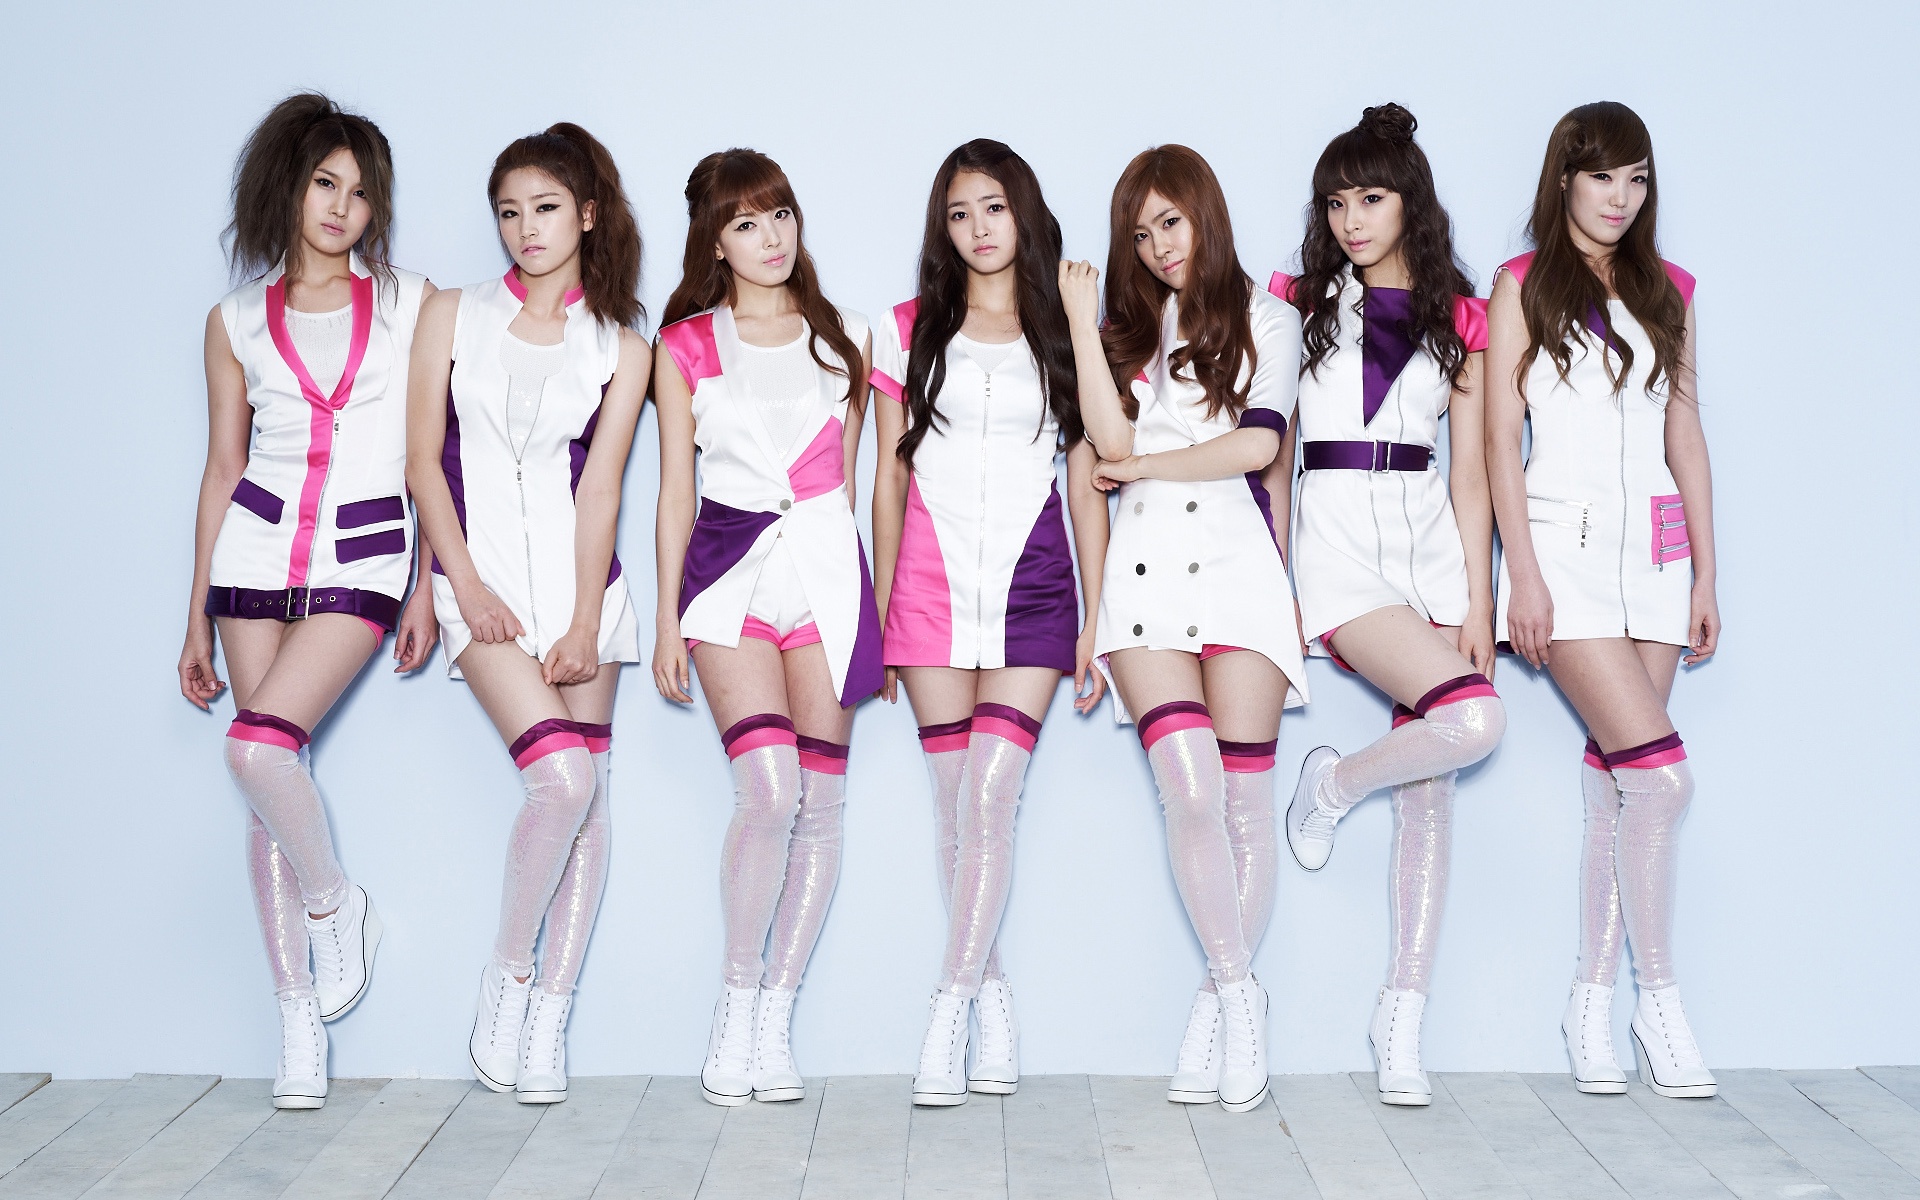 Wallpaper CHI CHI Korean music girl group 04 1920x1200 HD Picture, Image